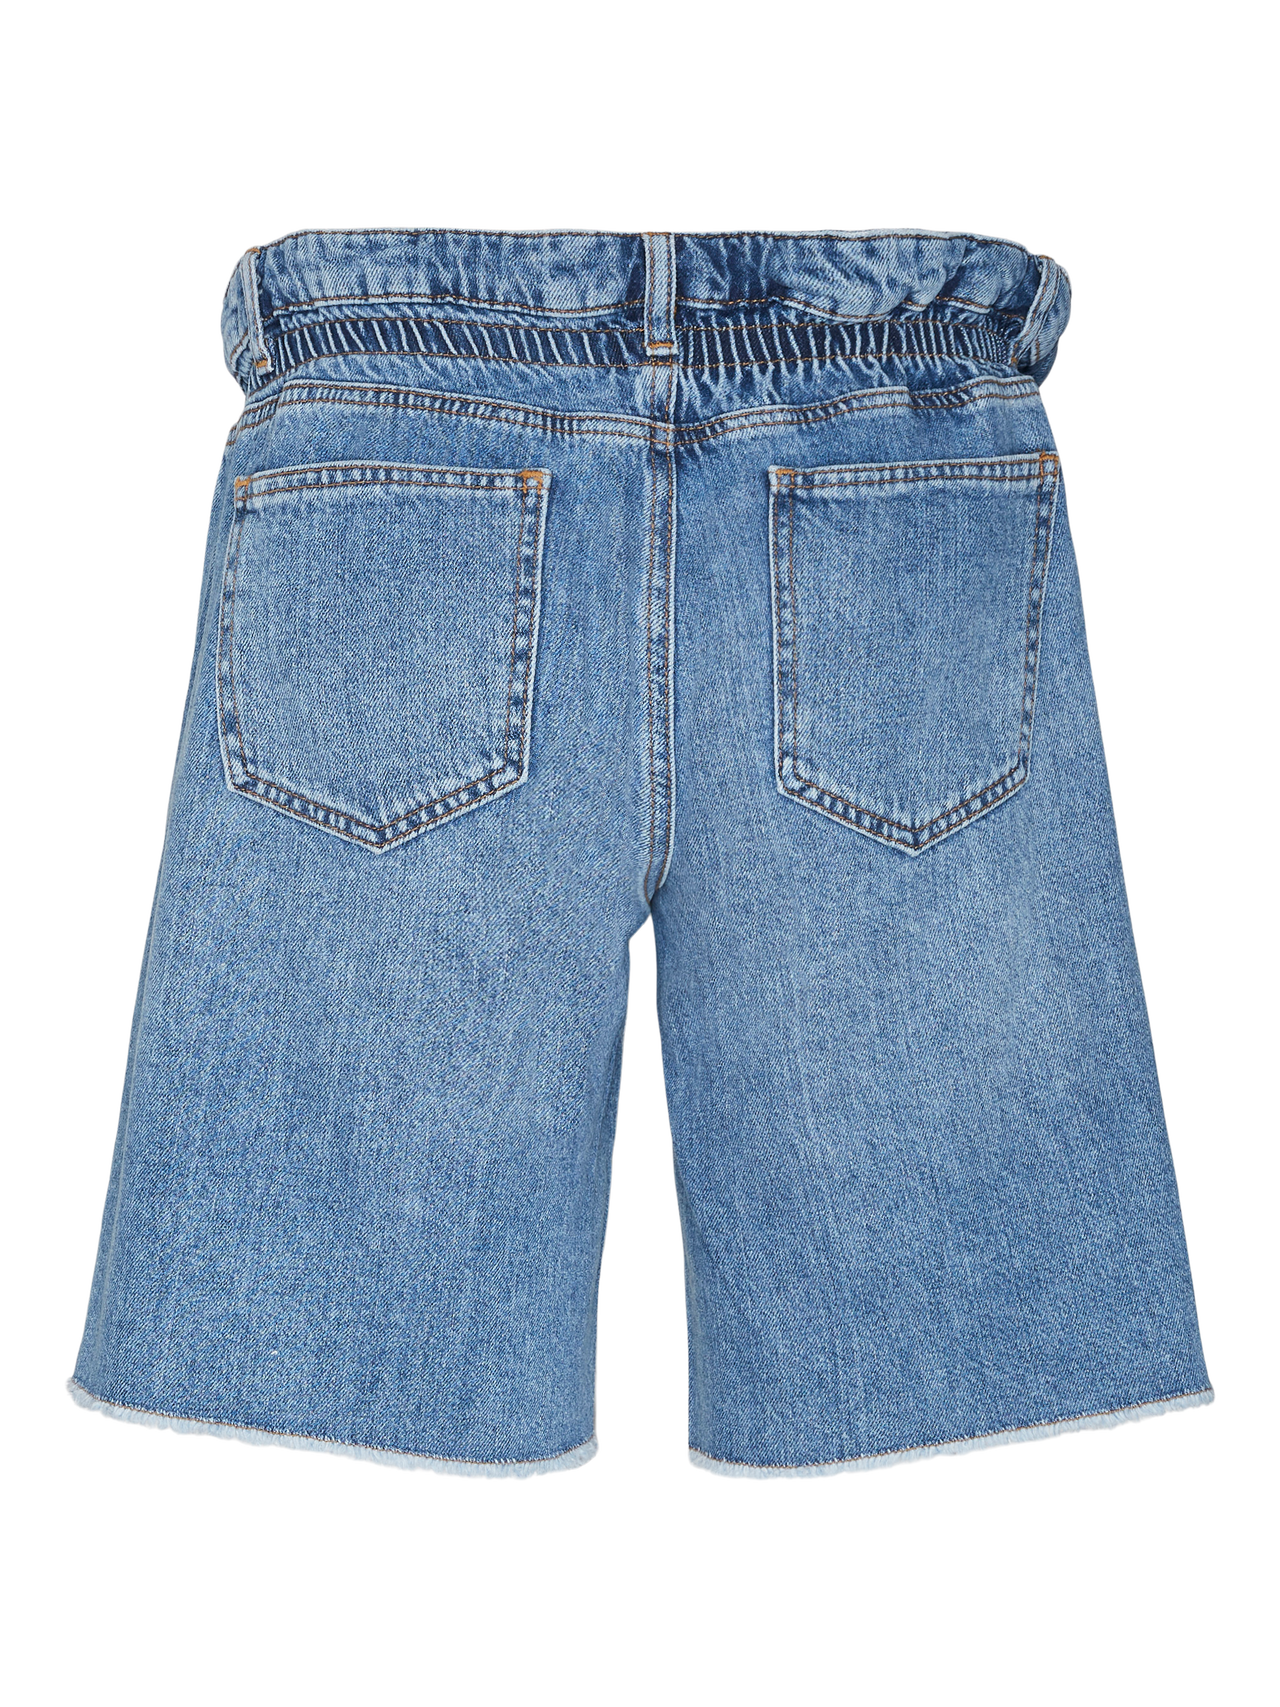 MAMA.LICIOUS Shorts Relaxed Fit Taille basse Ourlé destroy -Medium Blue Denim - 20020046